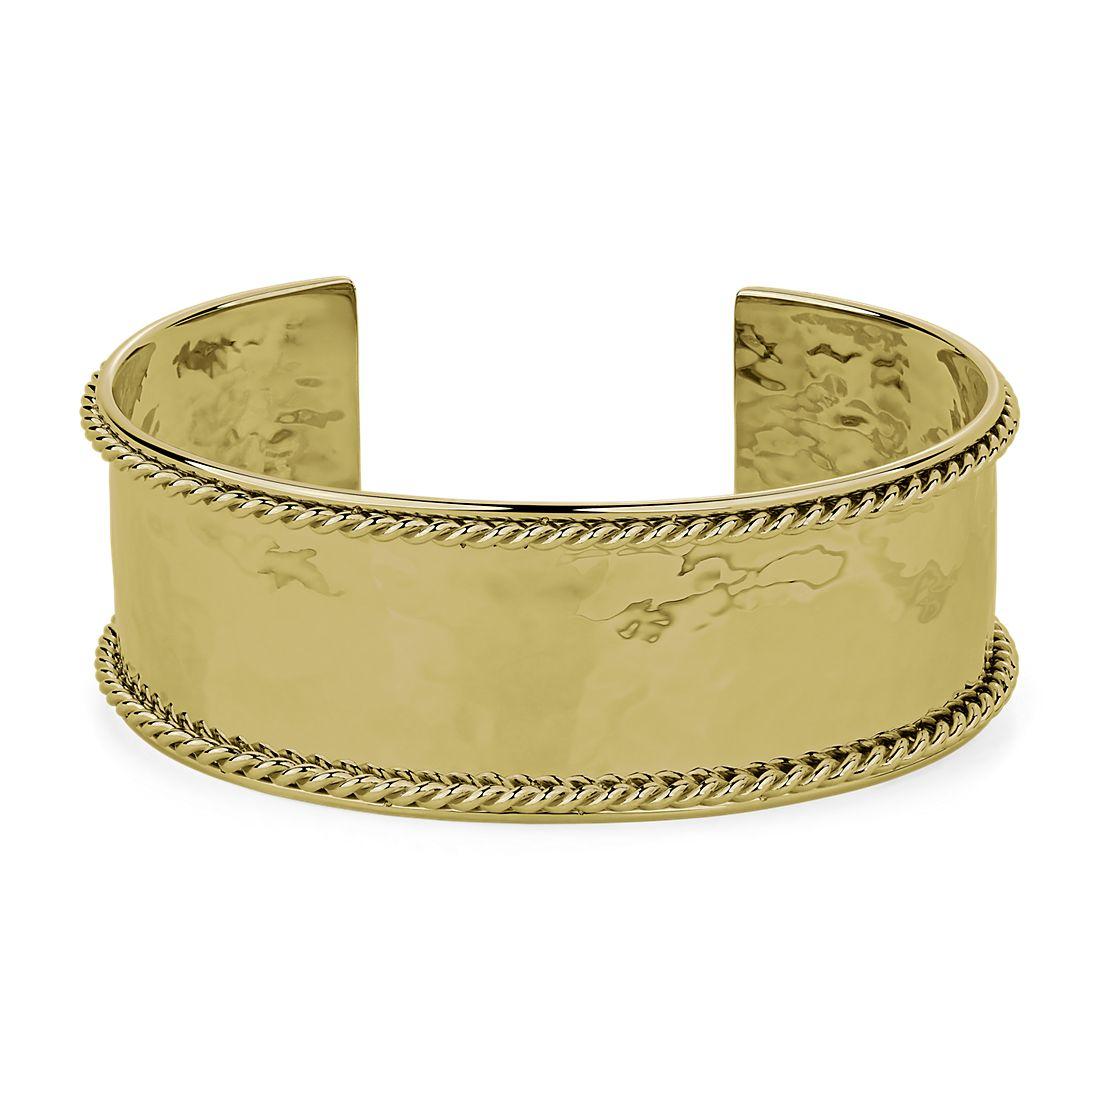 Metal Purity: 14k Yellow Gold
Hallmark: 14k
Country of Origin: Italy
Metal Weight: 22.5 grams
Measurement: 22mm wide - Adjustable
Certificate of Authenticity

The Italian Solid 14k Yellow Gold Cuff Bangle Bracelet is a beautiful and unique piece of